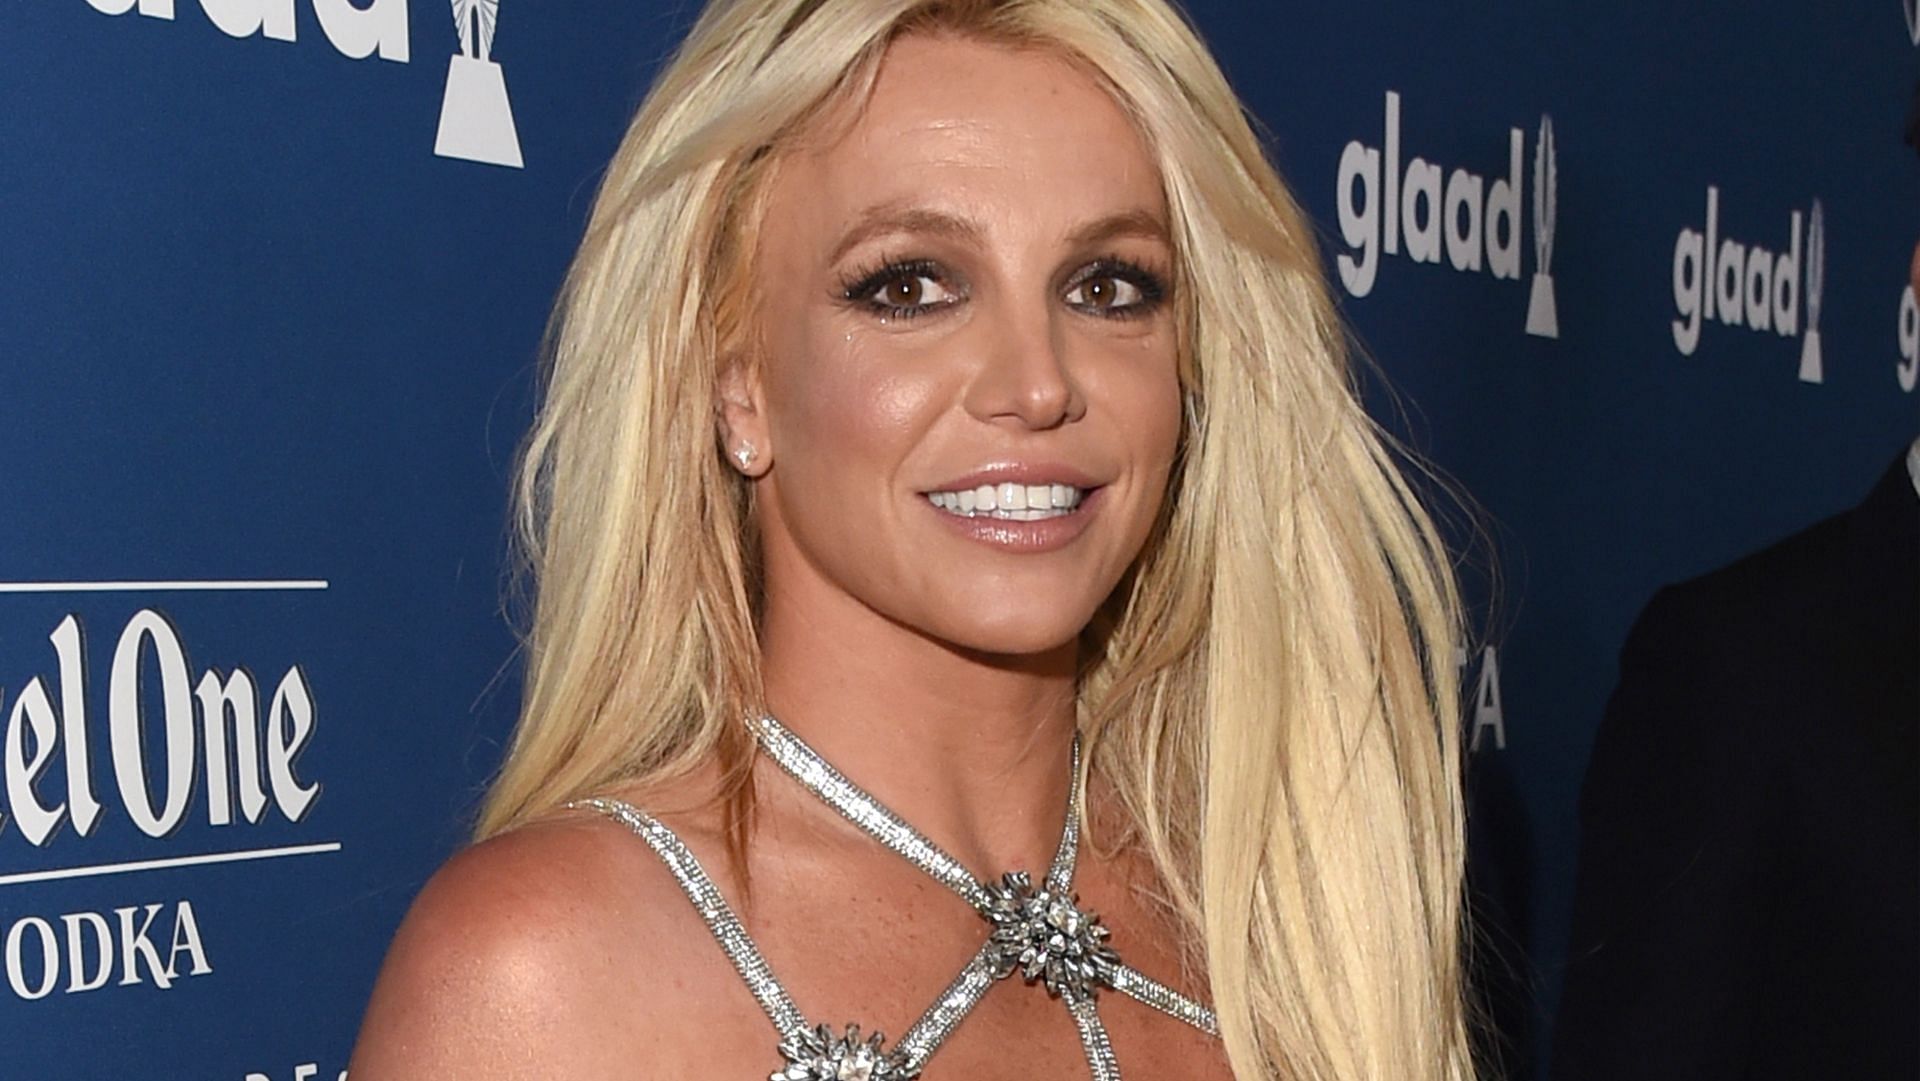 Britney Spears was in conservatorship for 13 years before it ended in November 2021 (Image via J. Merritt/Getty)